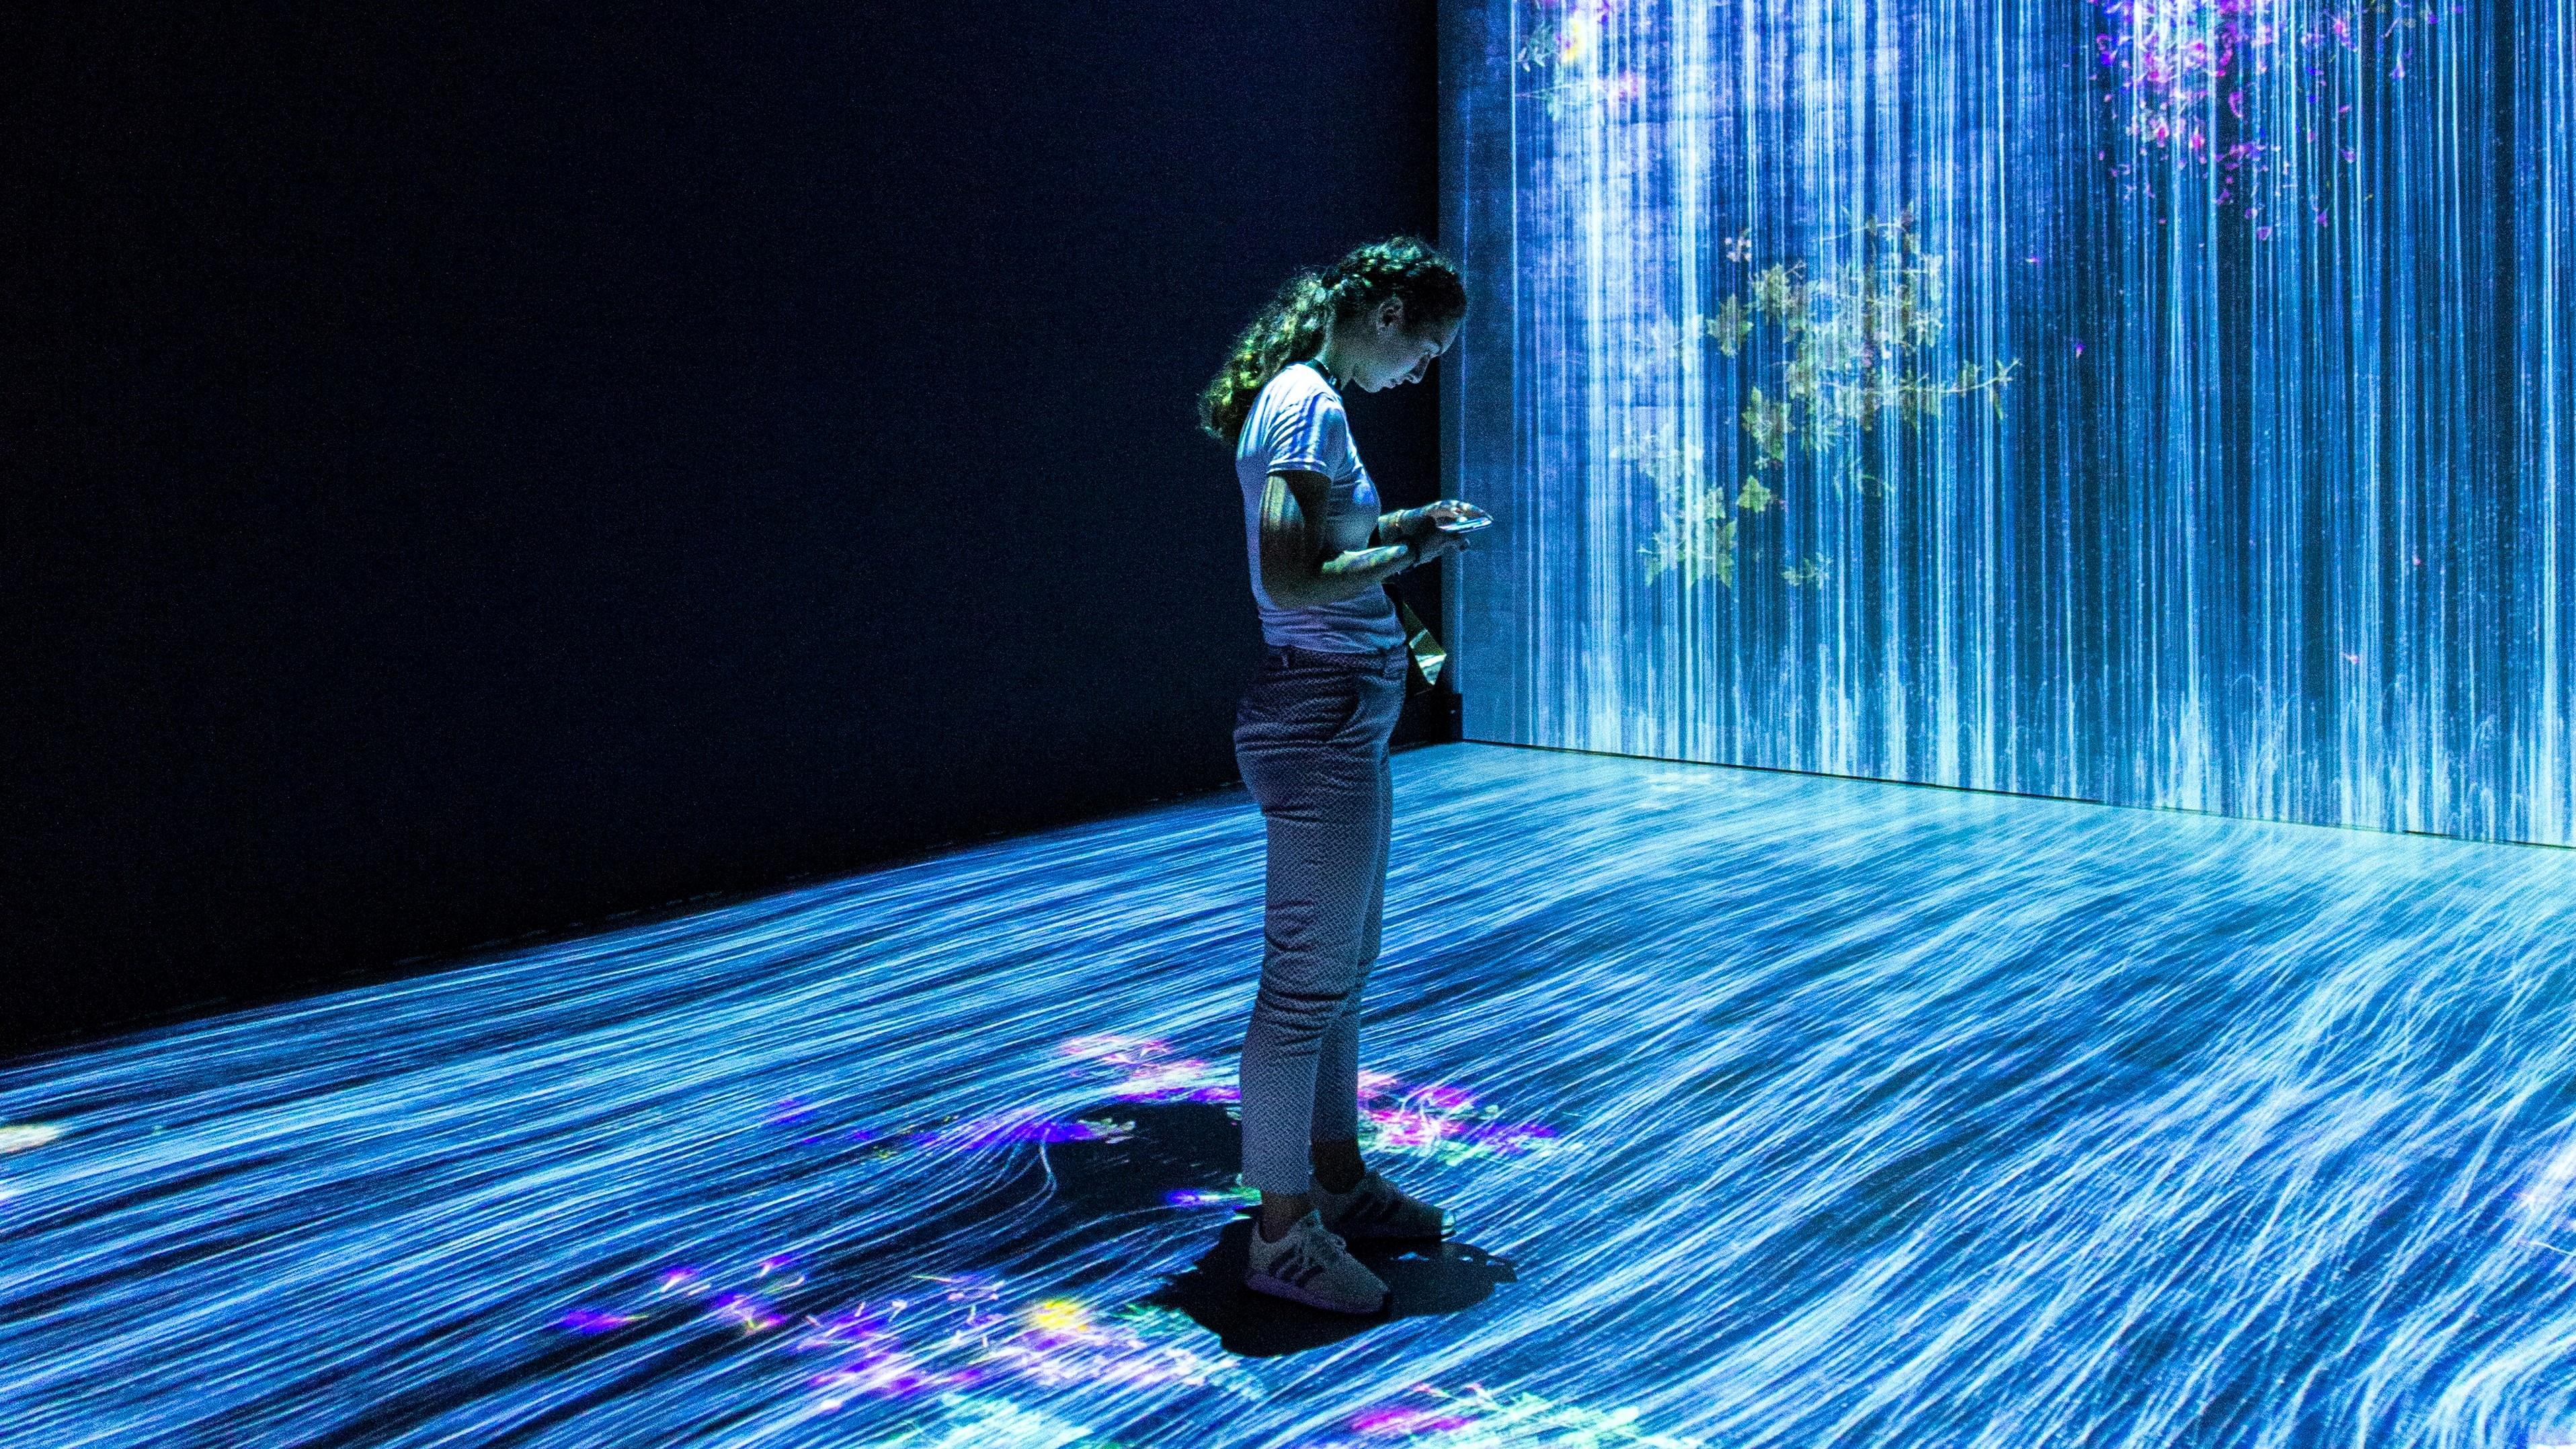 A woman stands looking at her phone in the center of an artistic display of data.